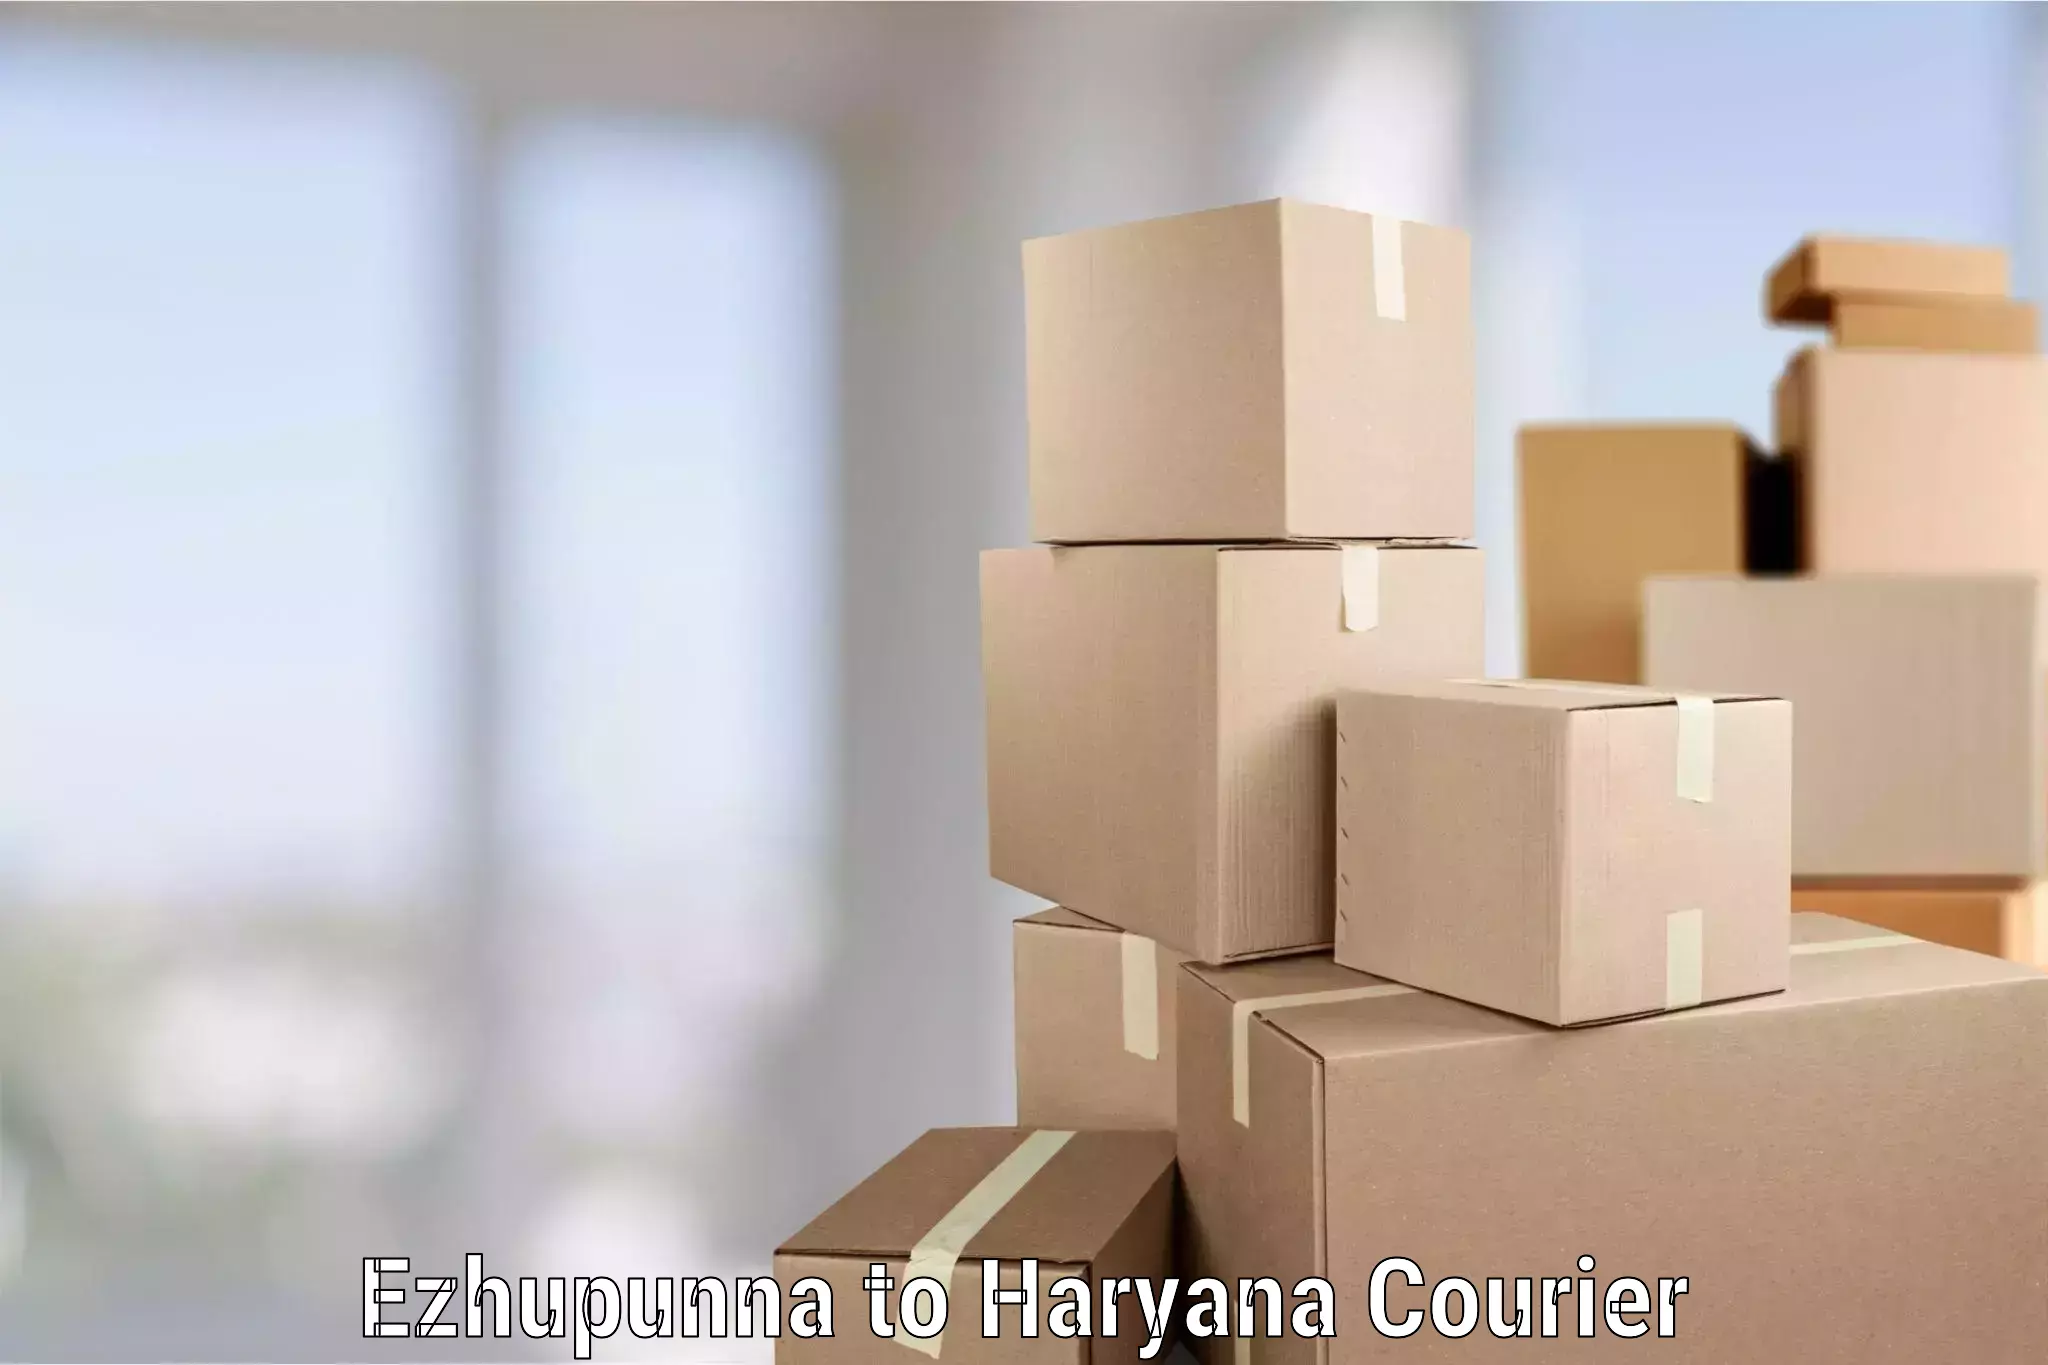 Moving and handling services in Ezhupunna to Haryana